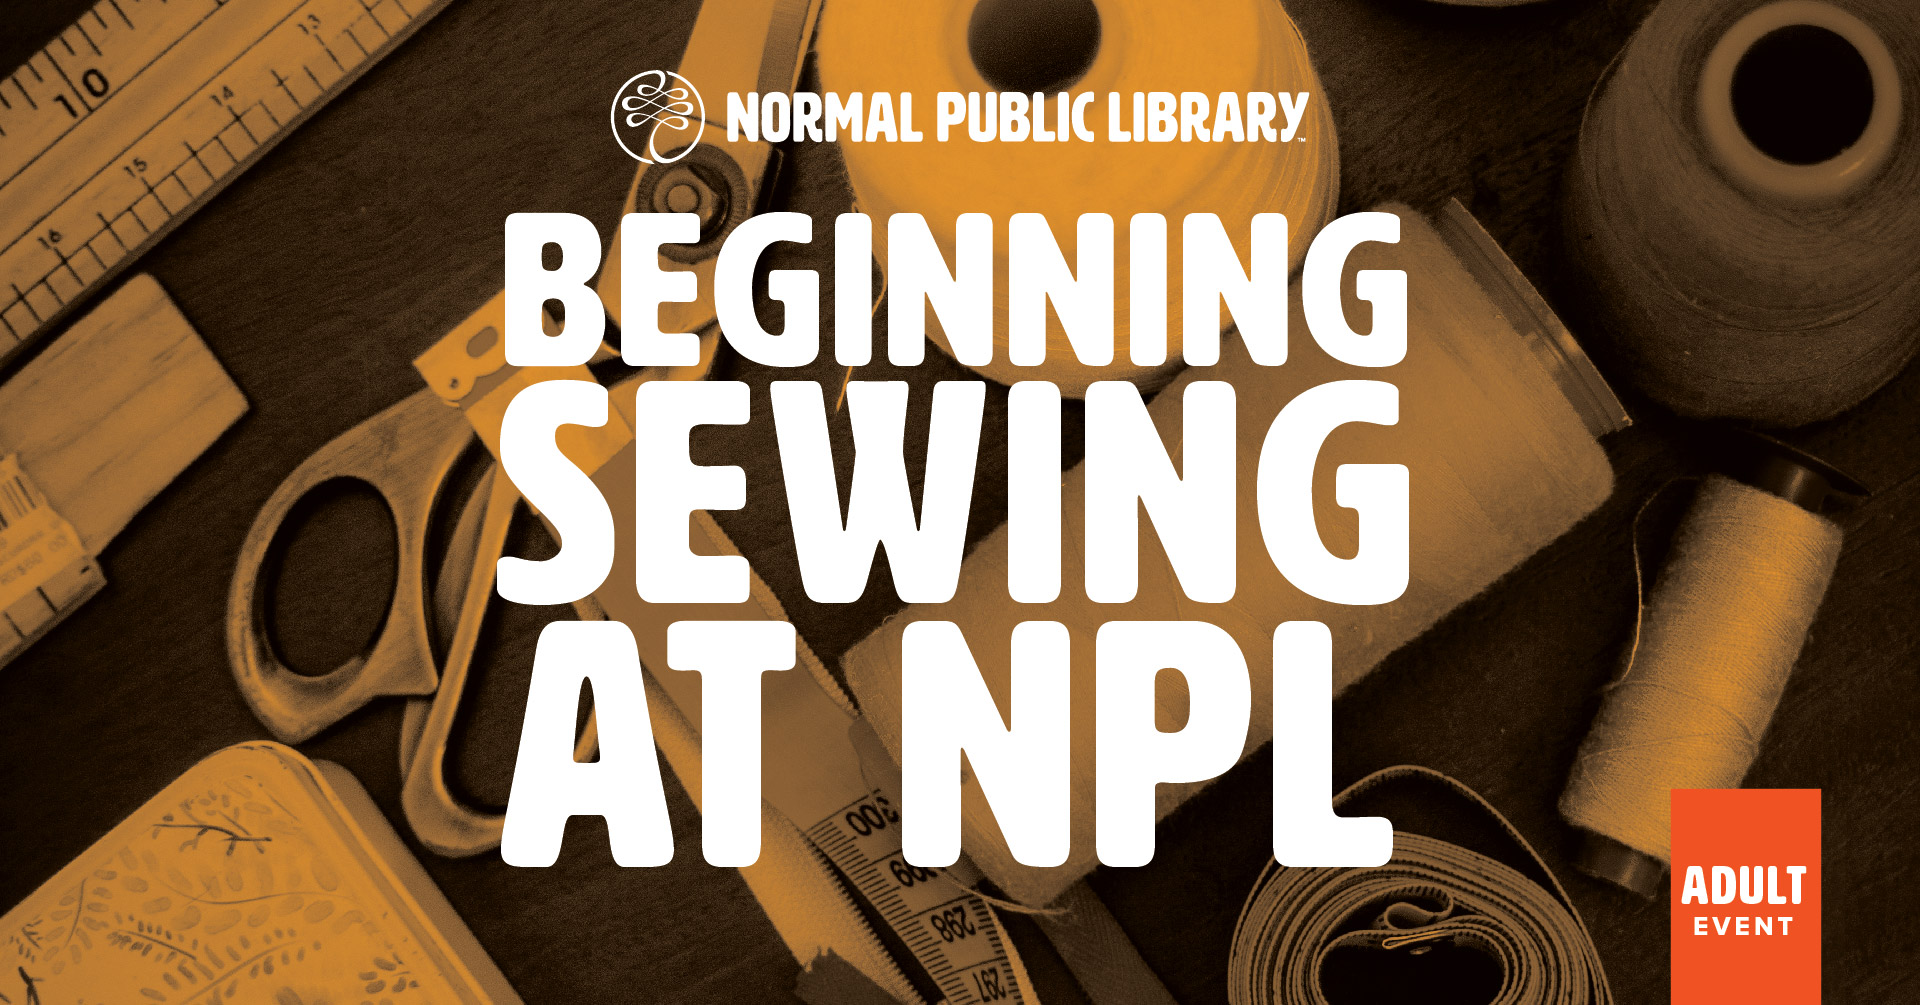 Image for Beginning Sewing at NPL.